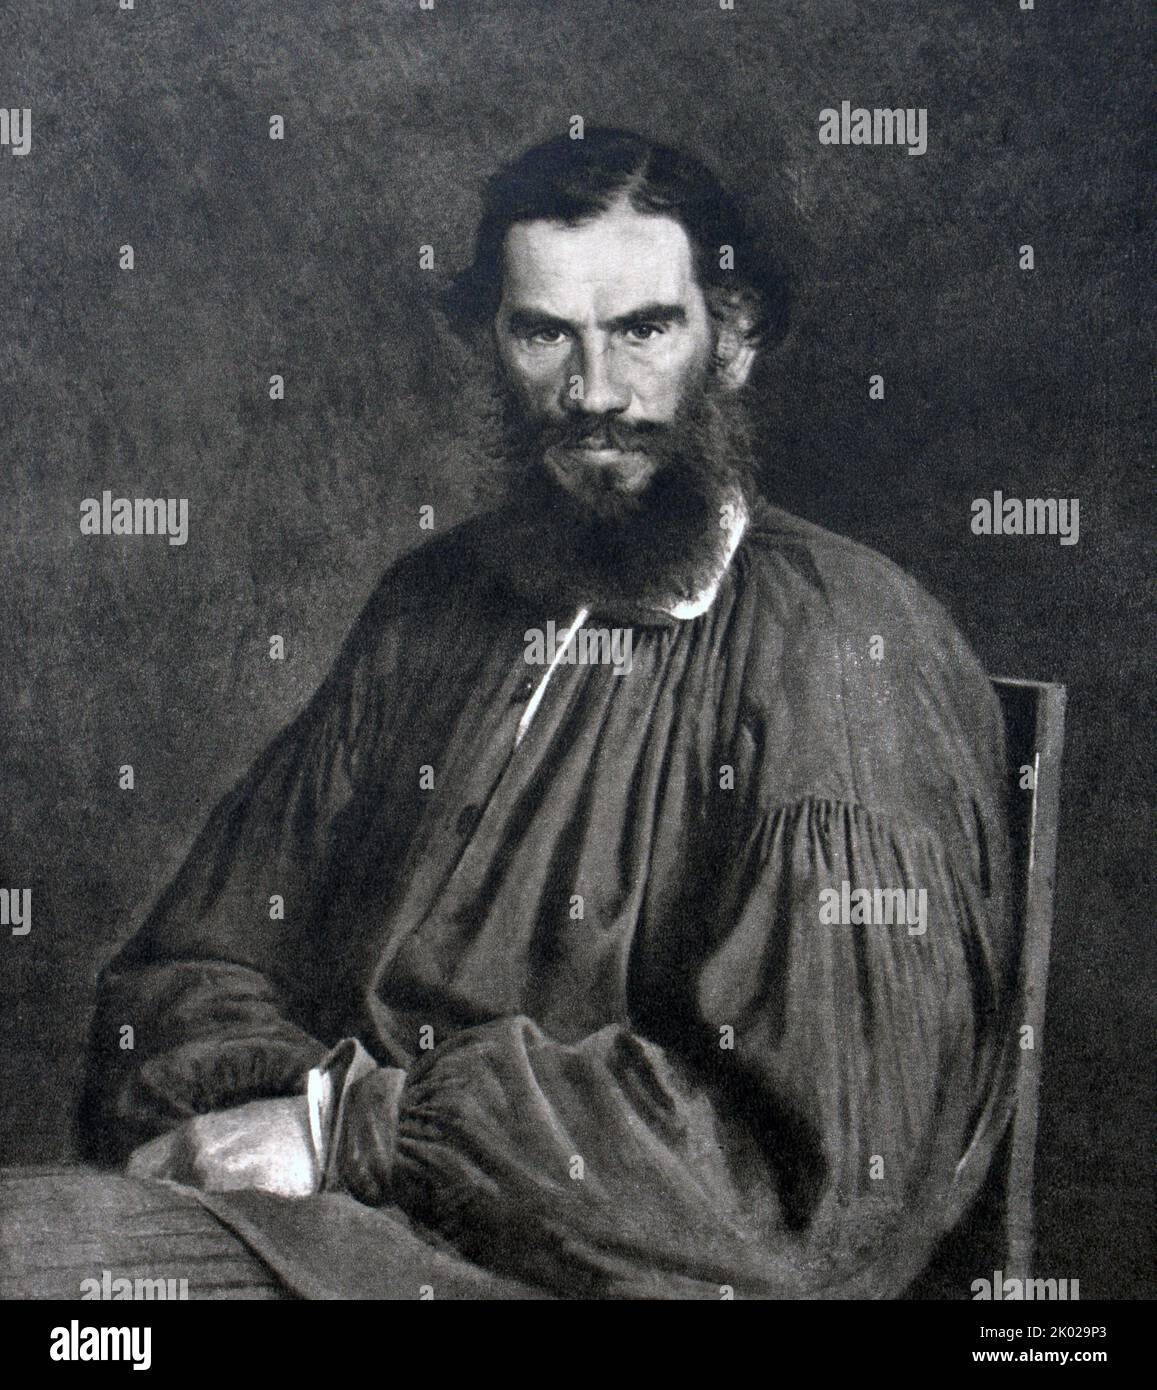 Portrait of the writer Leo Nikolaevich Tolstoy. Kramskoy I.N. 1873. Count Lev Nikolayevich Tolstoy (1828 - 1910), was a Russian writer who is regarded as one of the greatest authors of all time Stock Photo